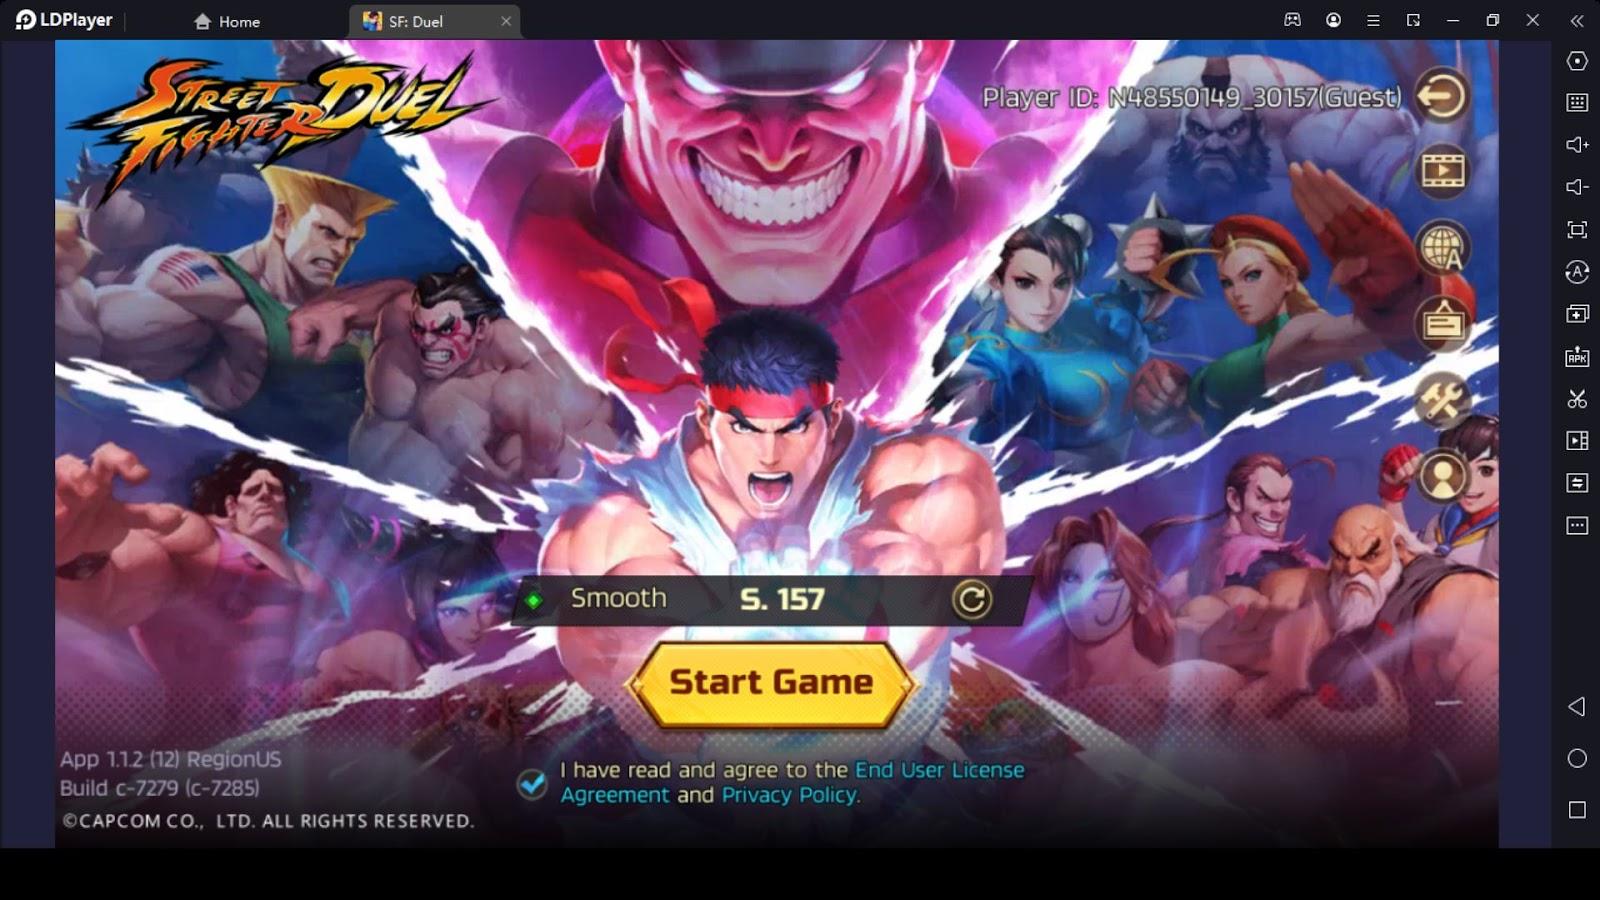 Street Fighter: Duel on the App Store